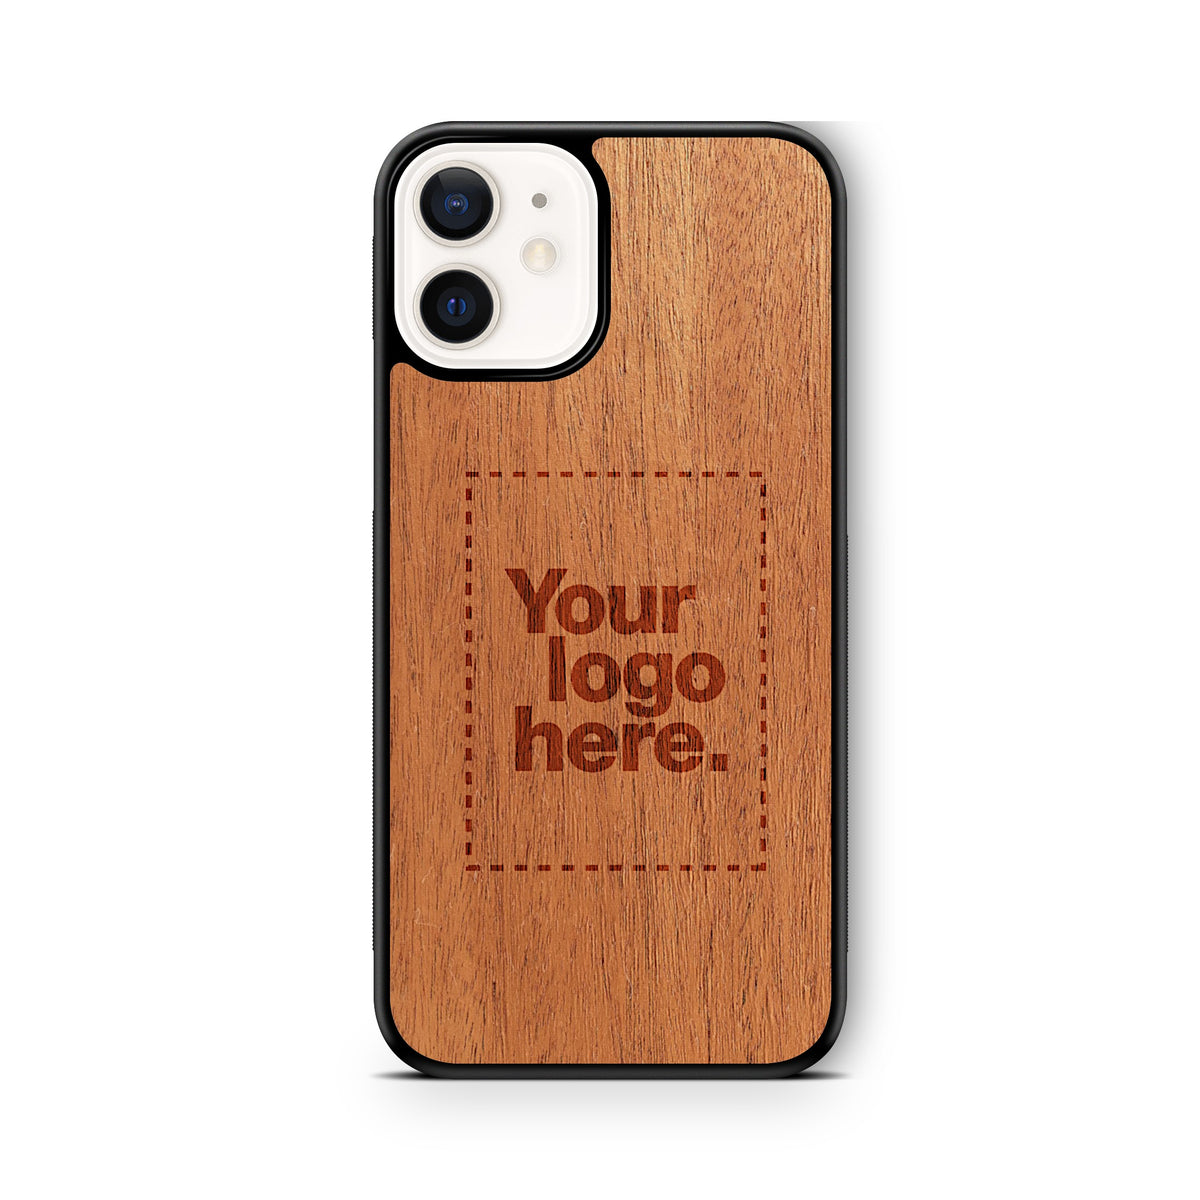 Custom carved burnt customized personalized laser engraved wooden Apple iPhone 12 